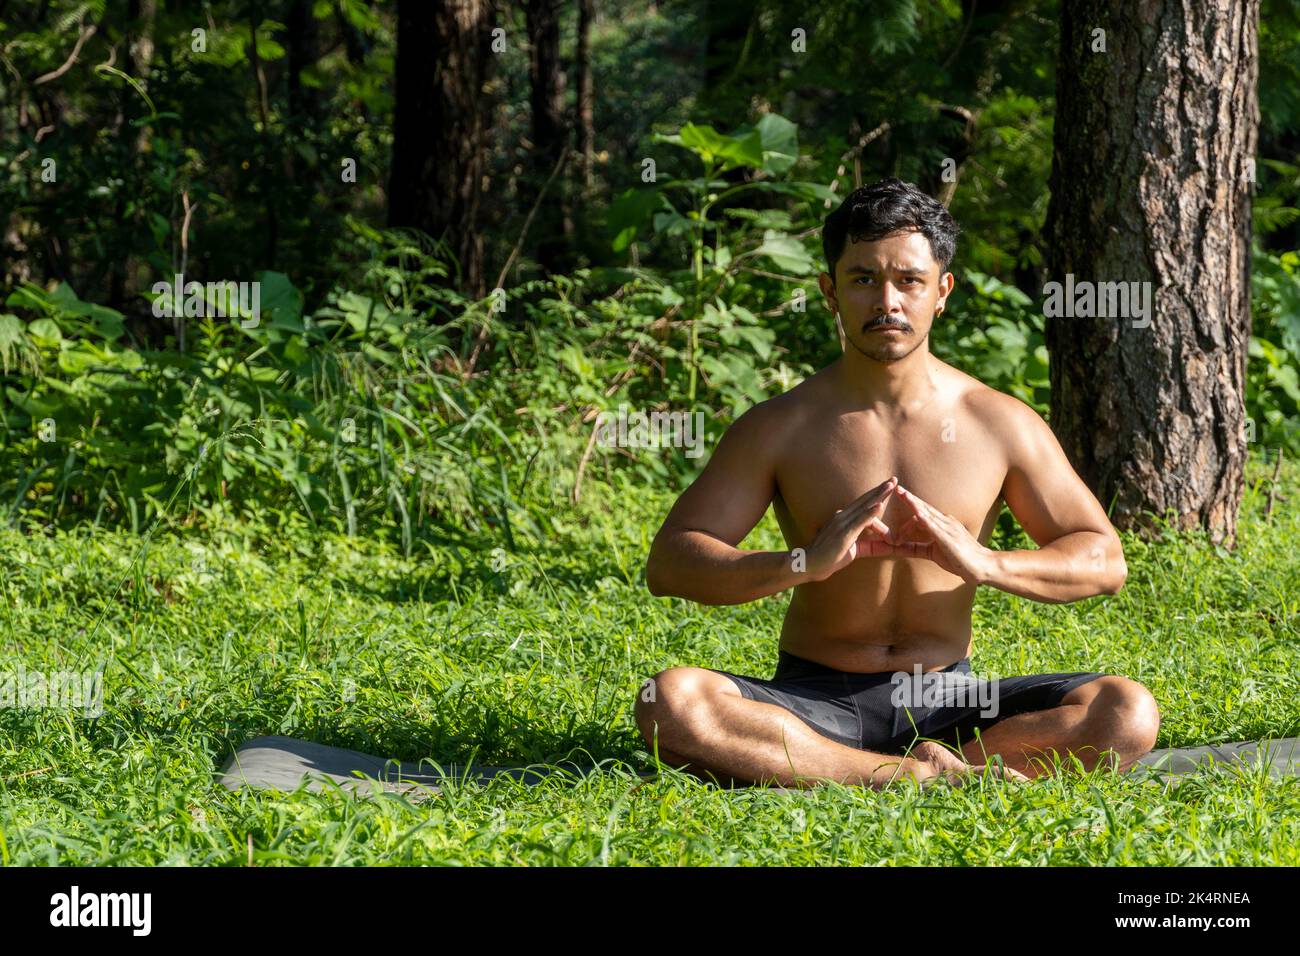 hispanic and latin man, meditating in the middle of a forest, receiving sun rays, brown skin, mexico Stock Photo